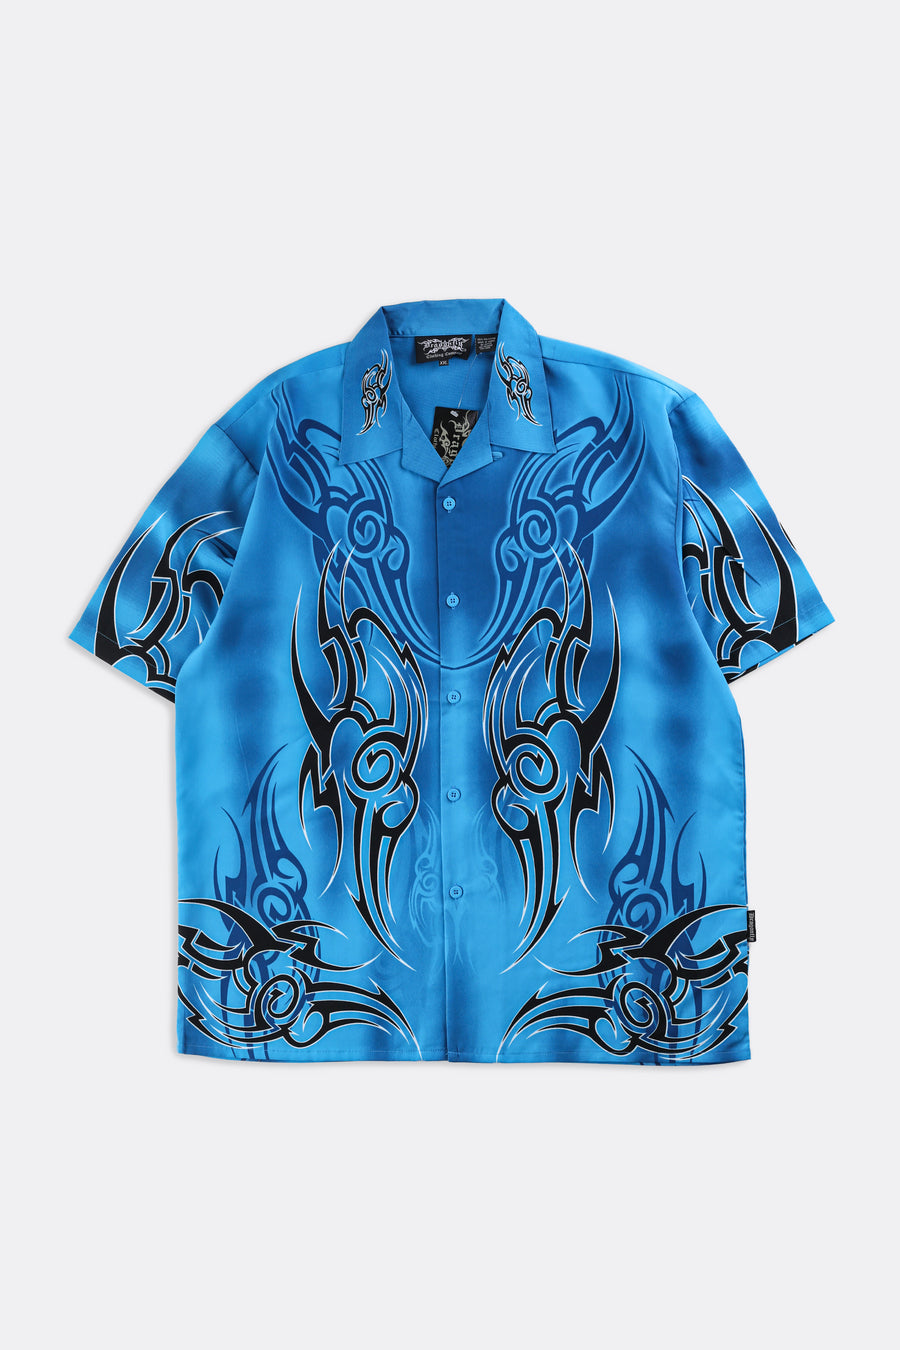 Deadstock Dragonfly Flames Camp Shirt - XXL